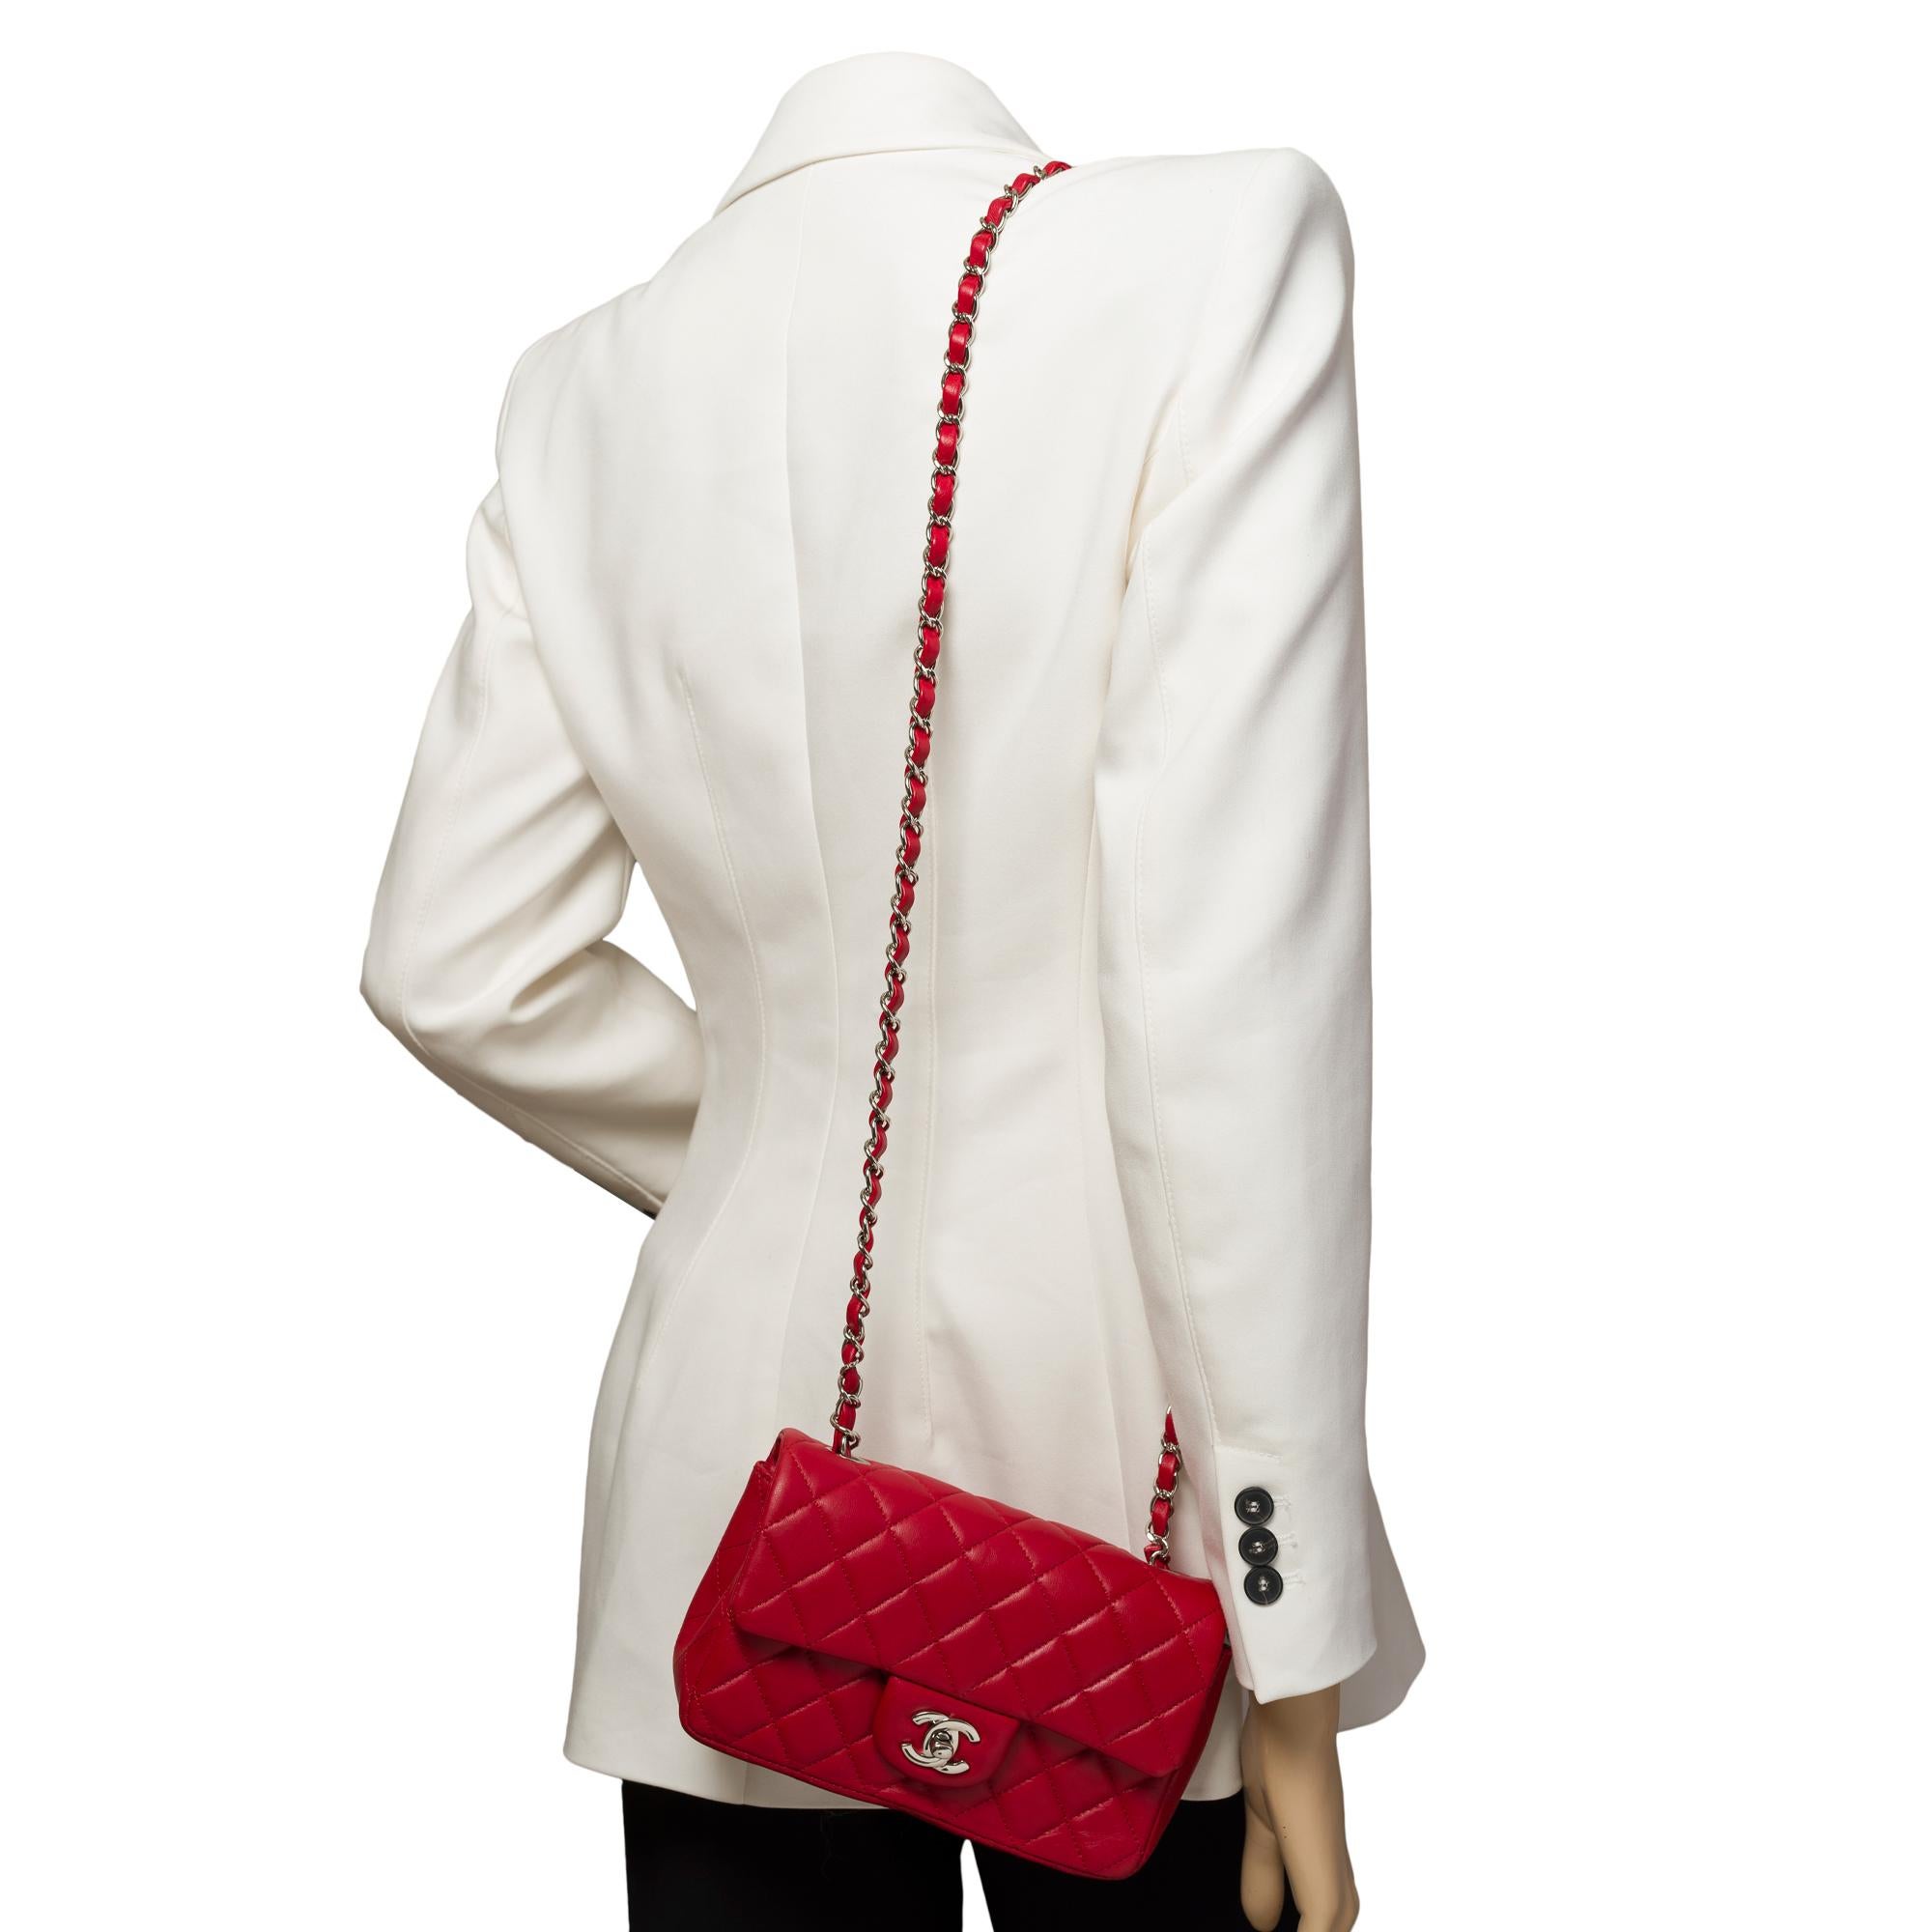 Stunning Chanel Timeless Mini Flap shoulder bag in Red quilted lamb leather, SHW 6